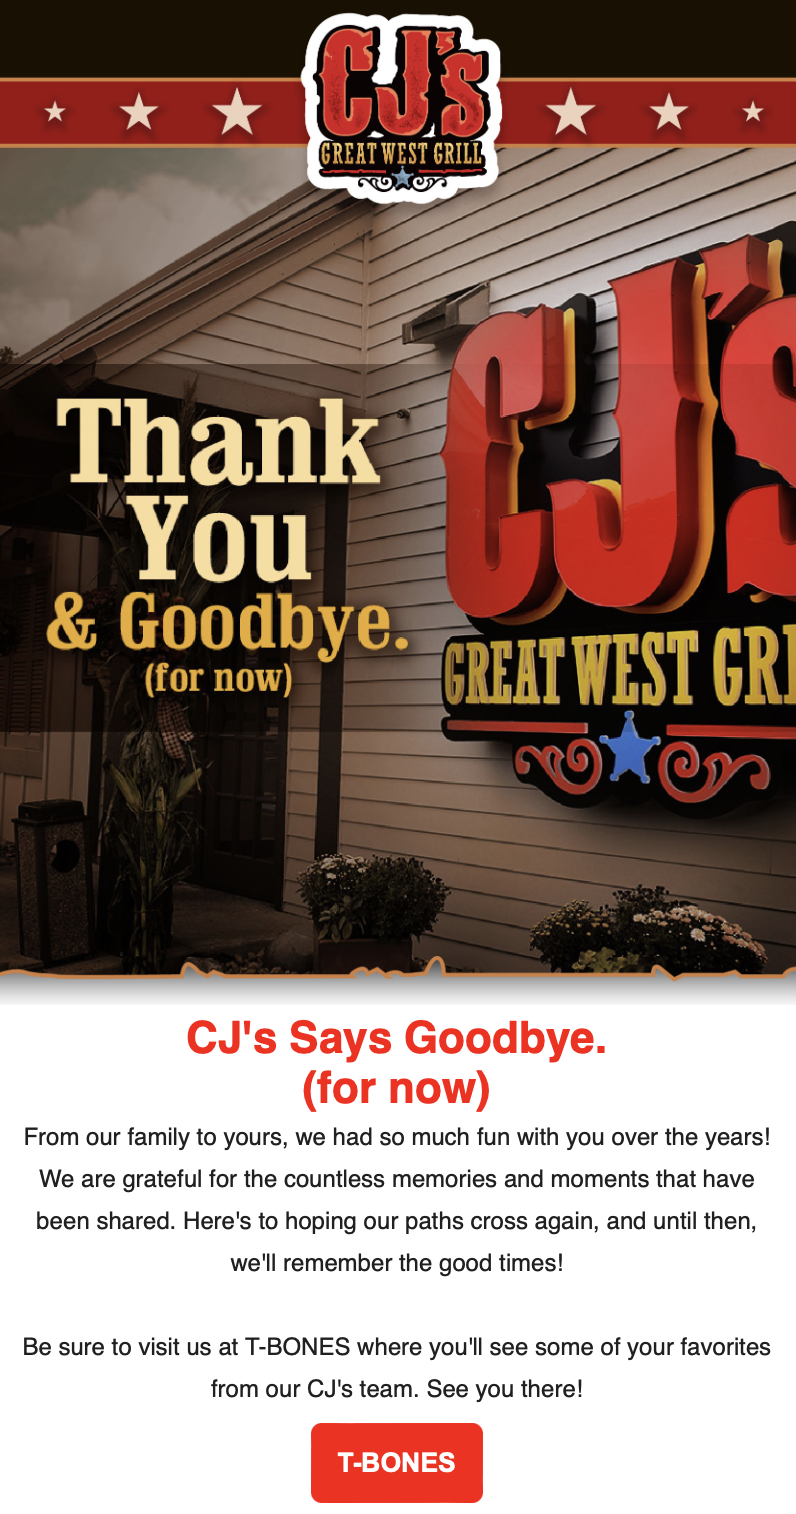 CJ's Great West Grill - A Great NH Restaurants Company